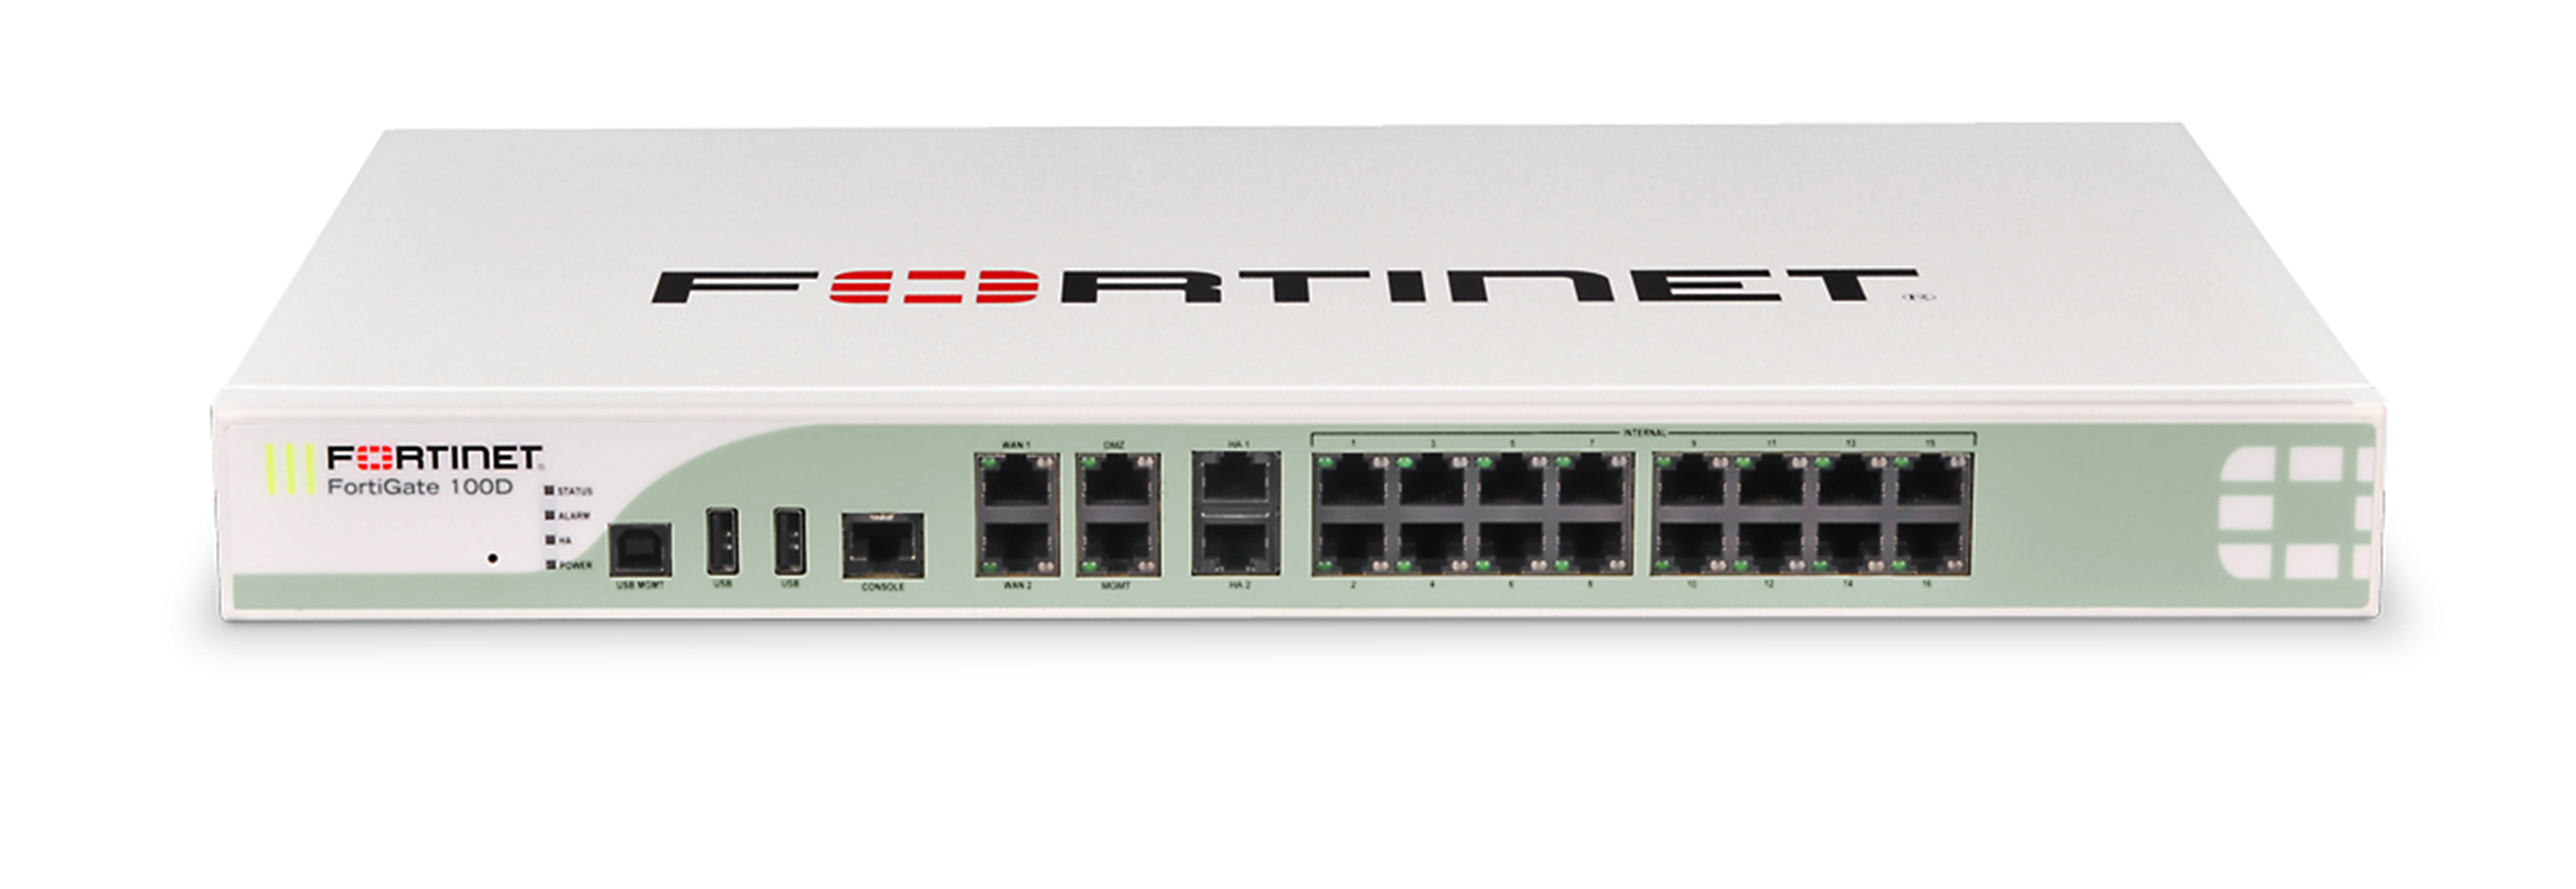 where download fortinet firmware